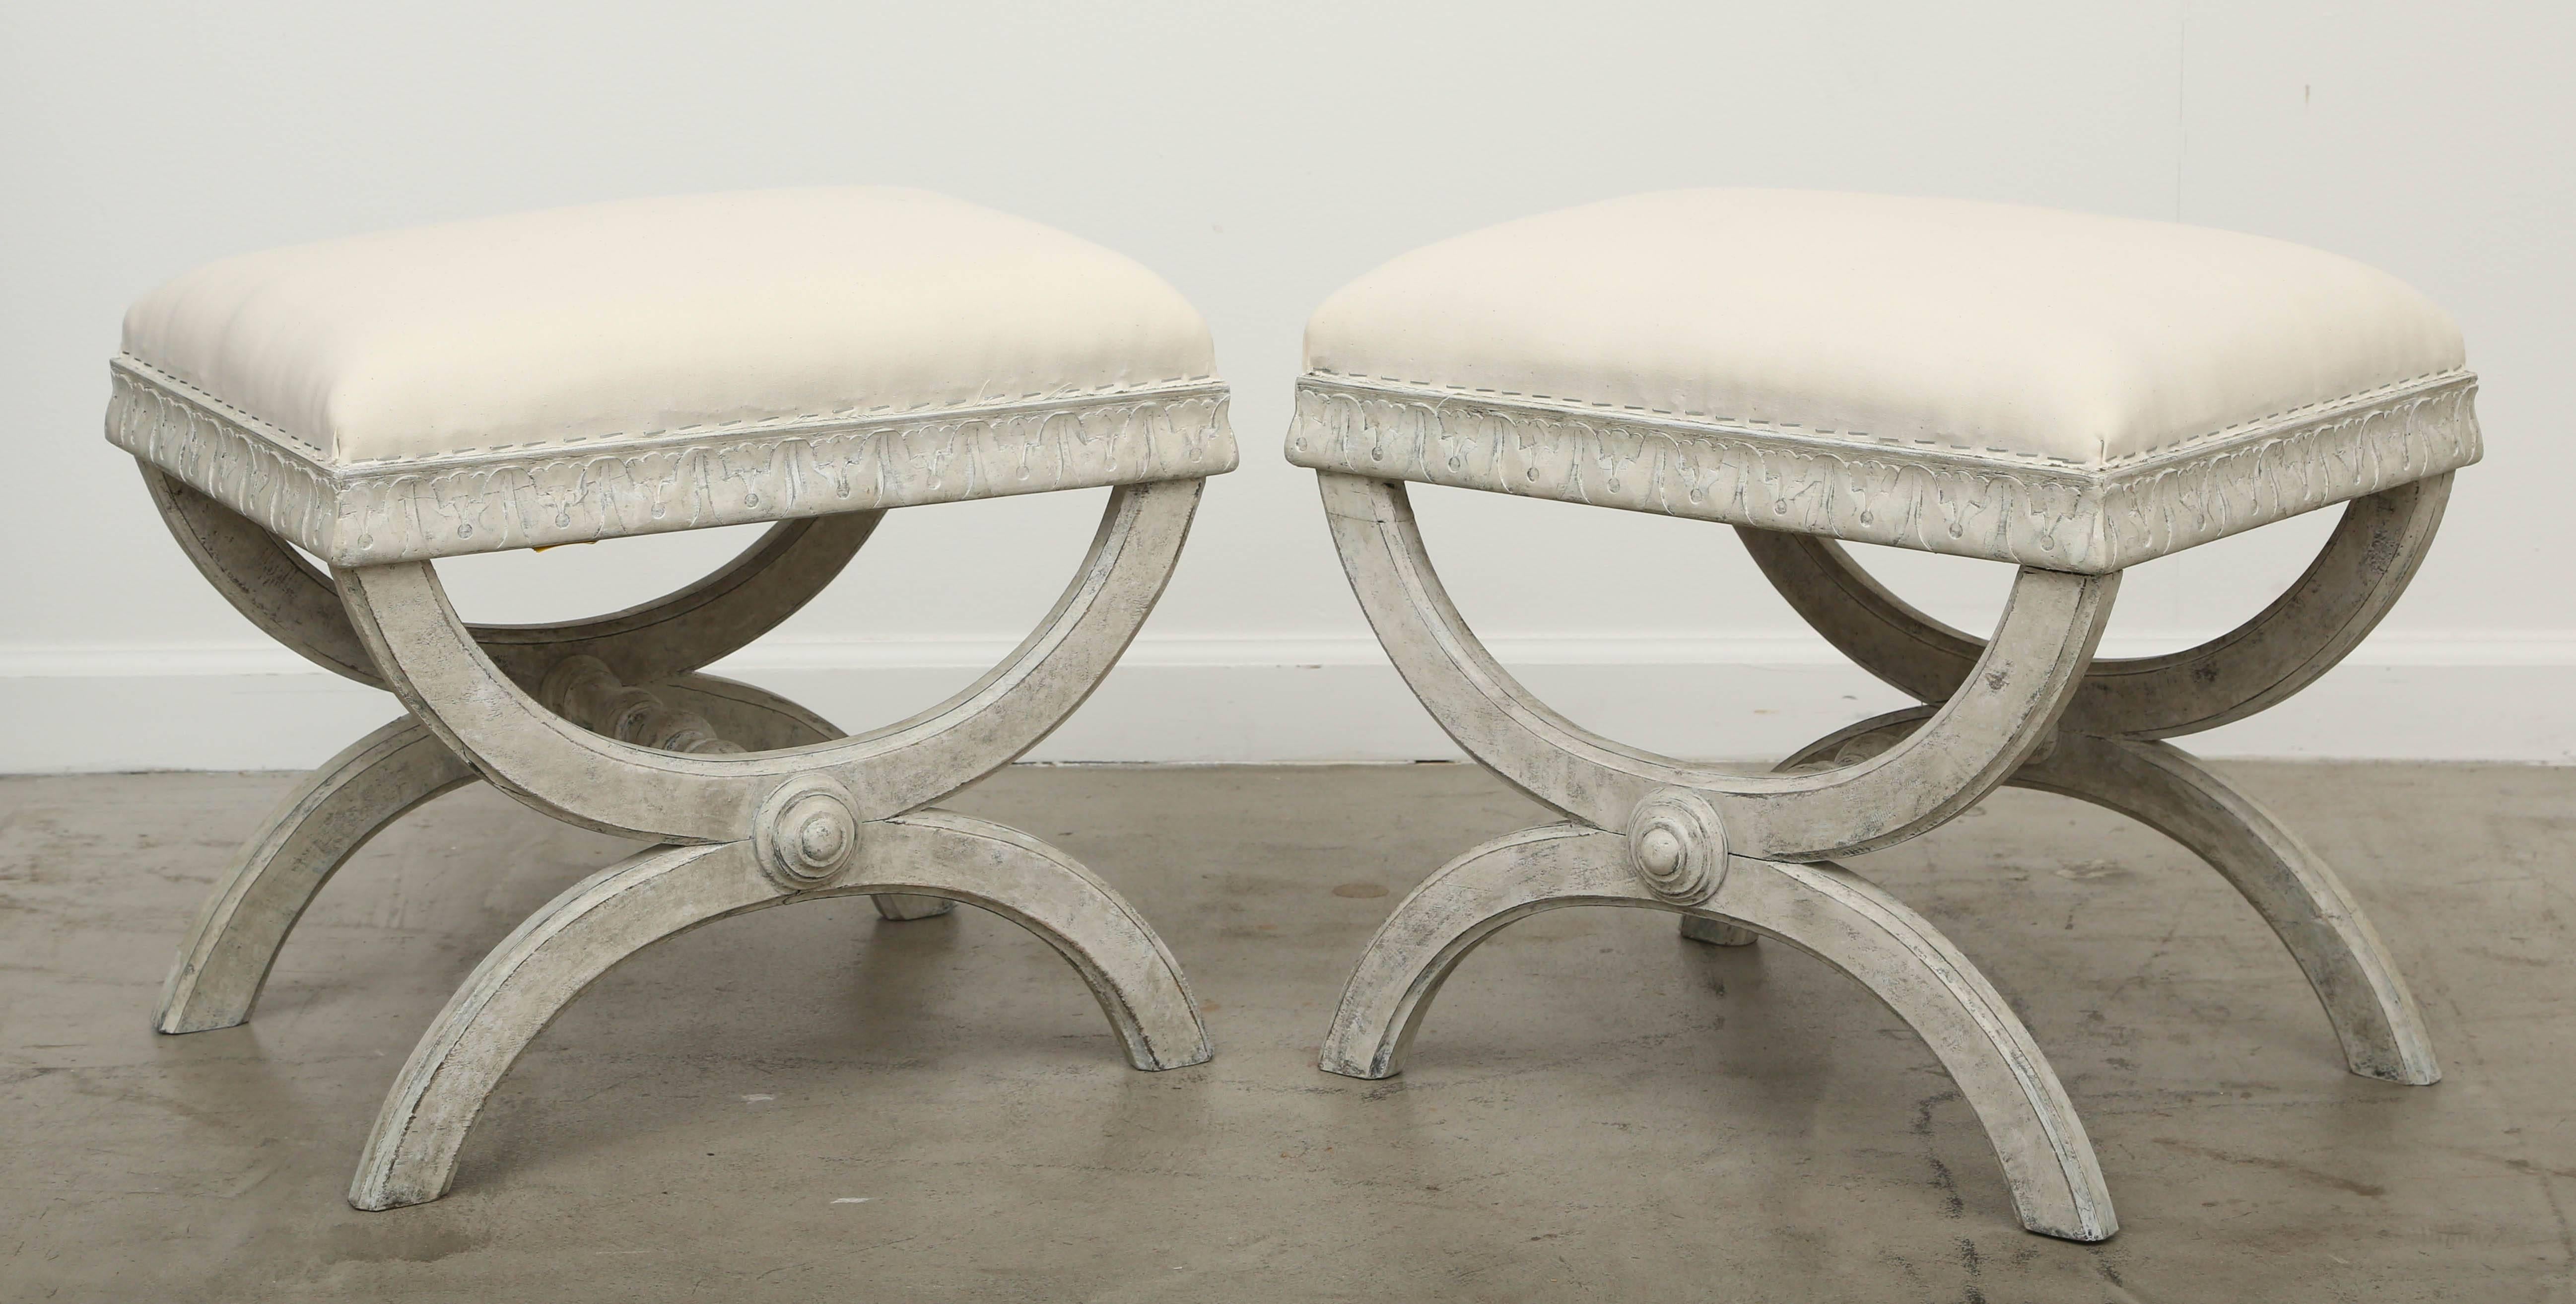 Pair antique Swedish Gustavian style Painted   X-base stools, early 19th century.
Painted in a Swedish grey distressed finish, lovely acanthus leaf border below upholstery,
round carved medallion at X of legs and turned carved stretchers.

Measures: